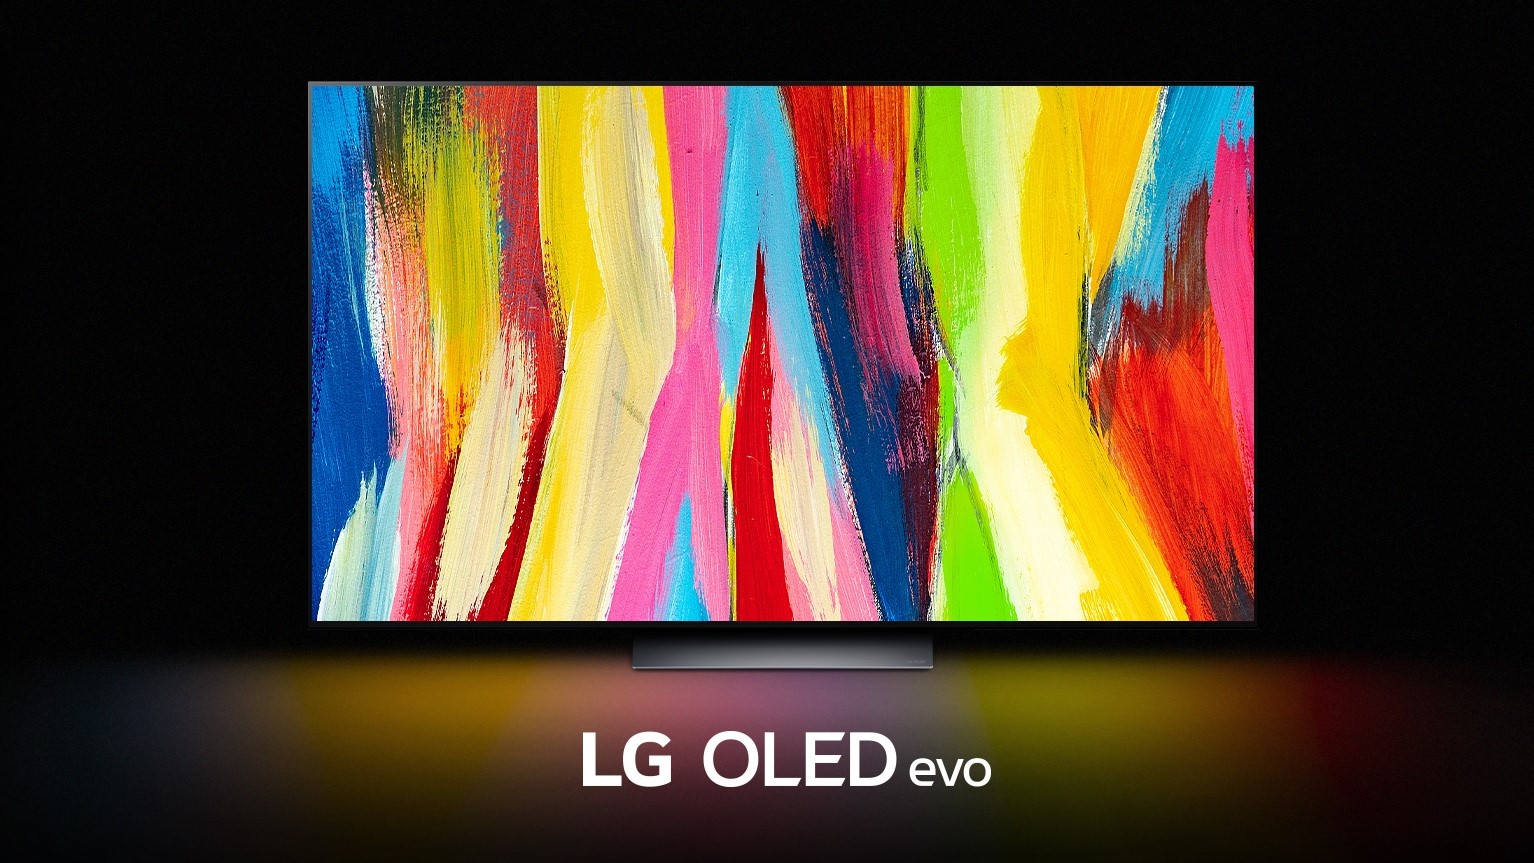 LG C2 OLED on a black background with a black pattern displayed on the screen.